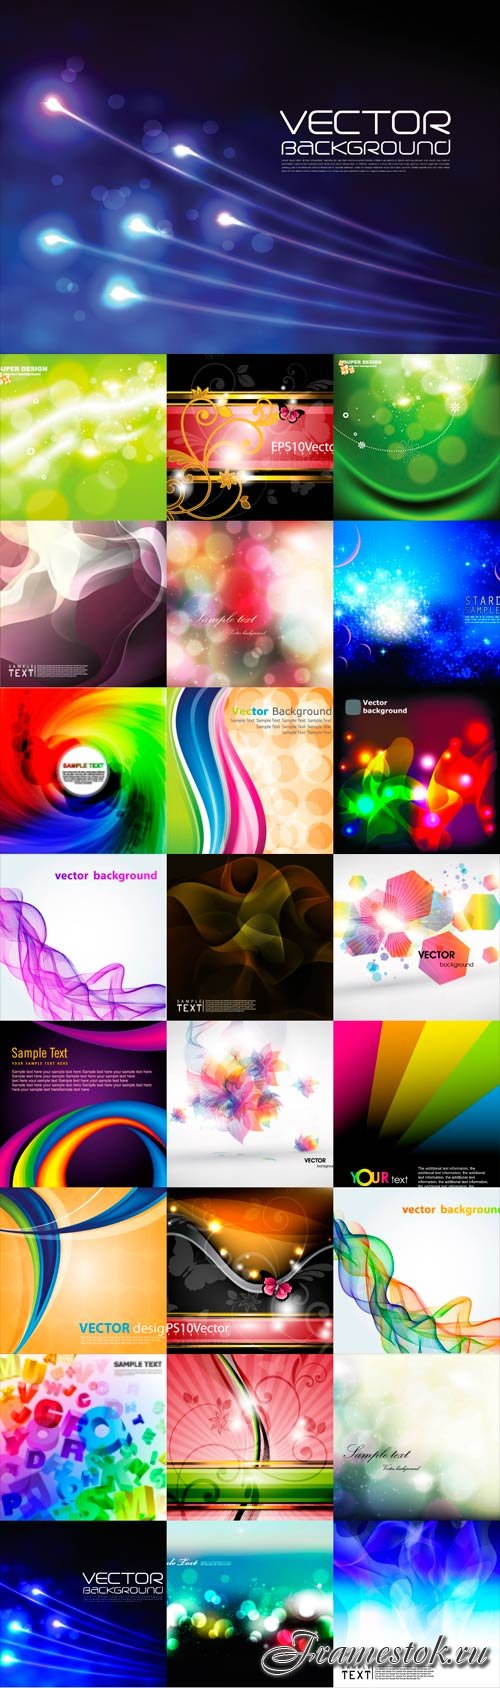 Bright colorful abstract backgrounds vector -34